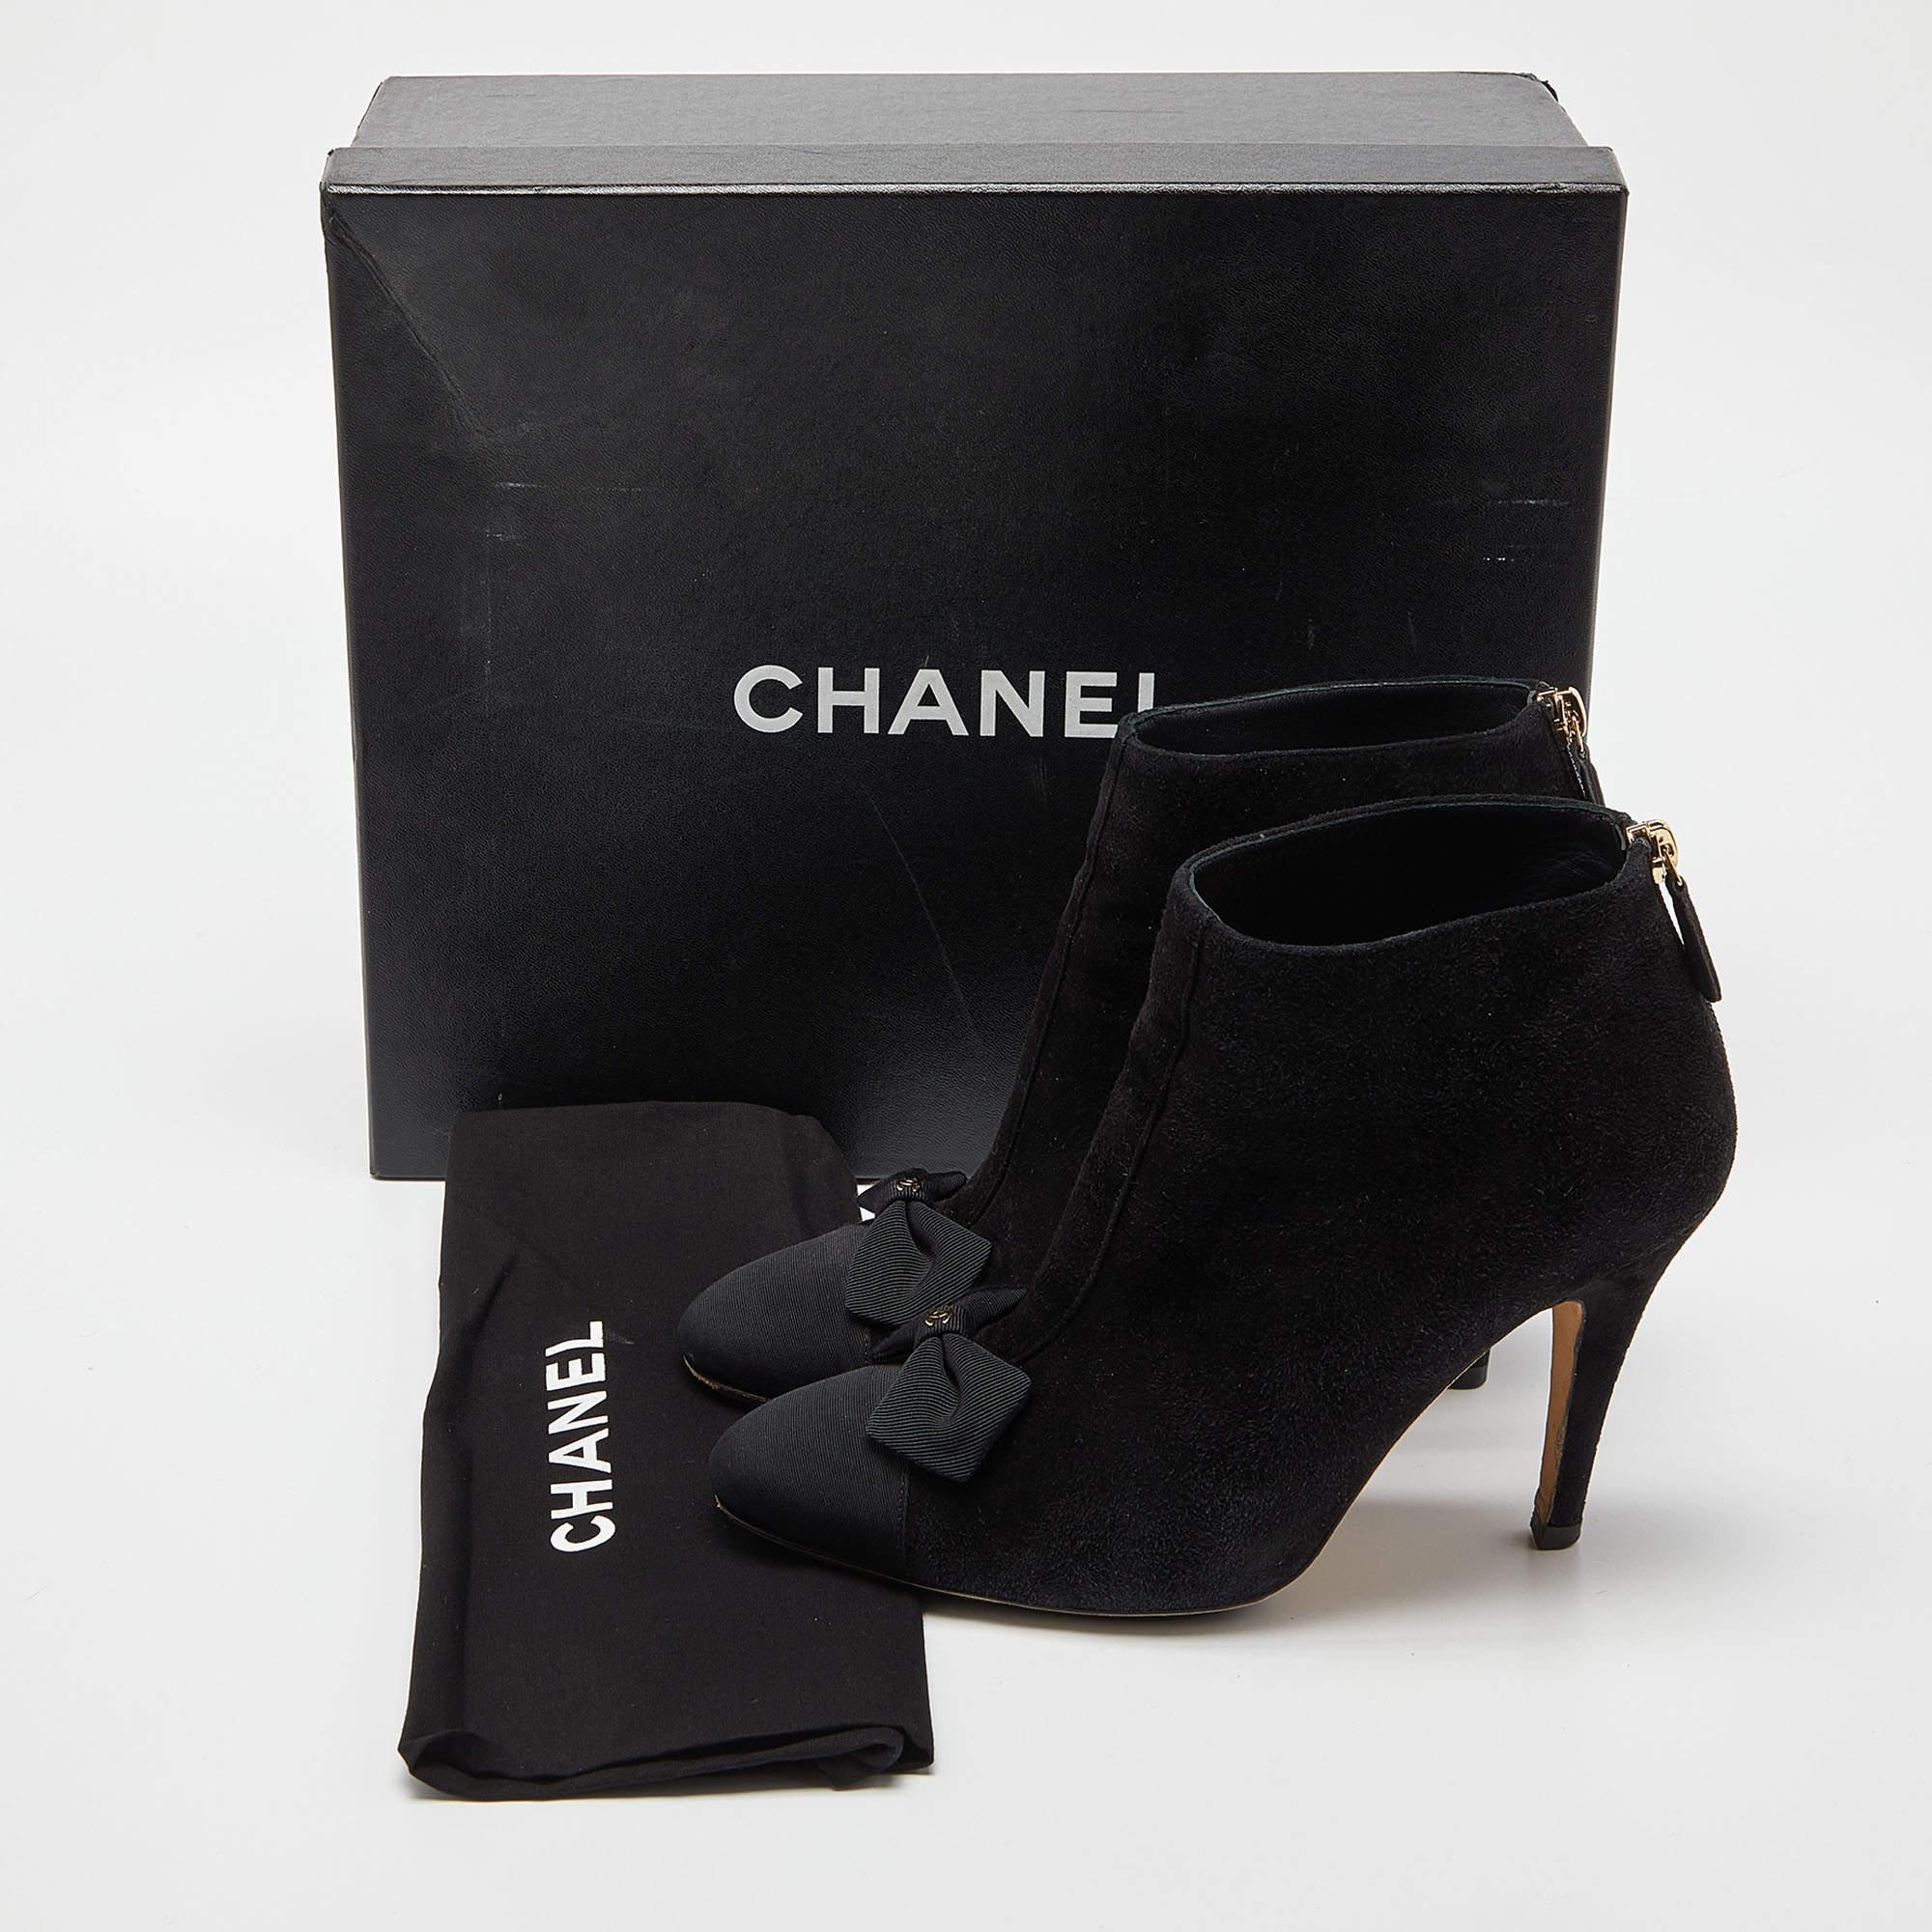 Chanel Black Suede and Canvas Zip Bow Cap Booties Size 39.5 6